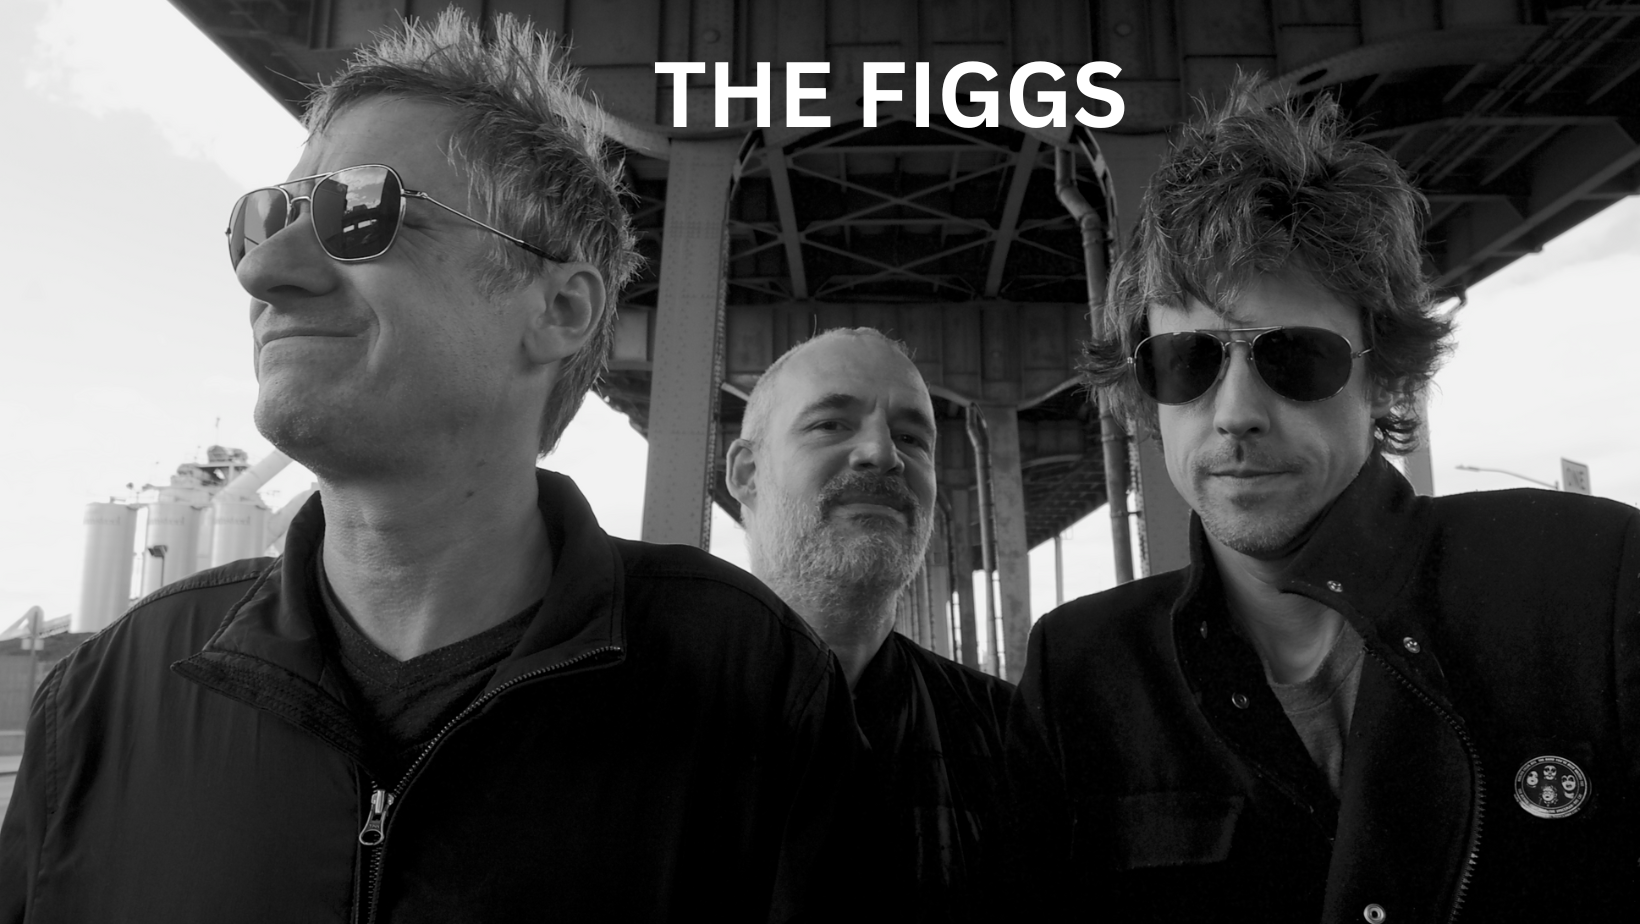 WED. SEPT 20: The Figgs